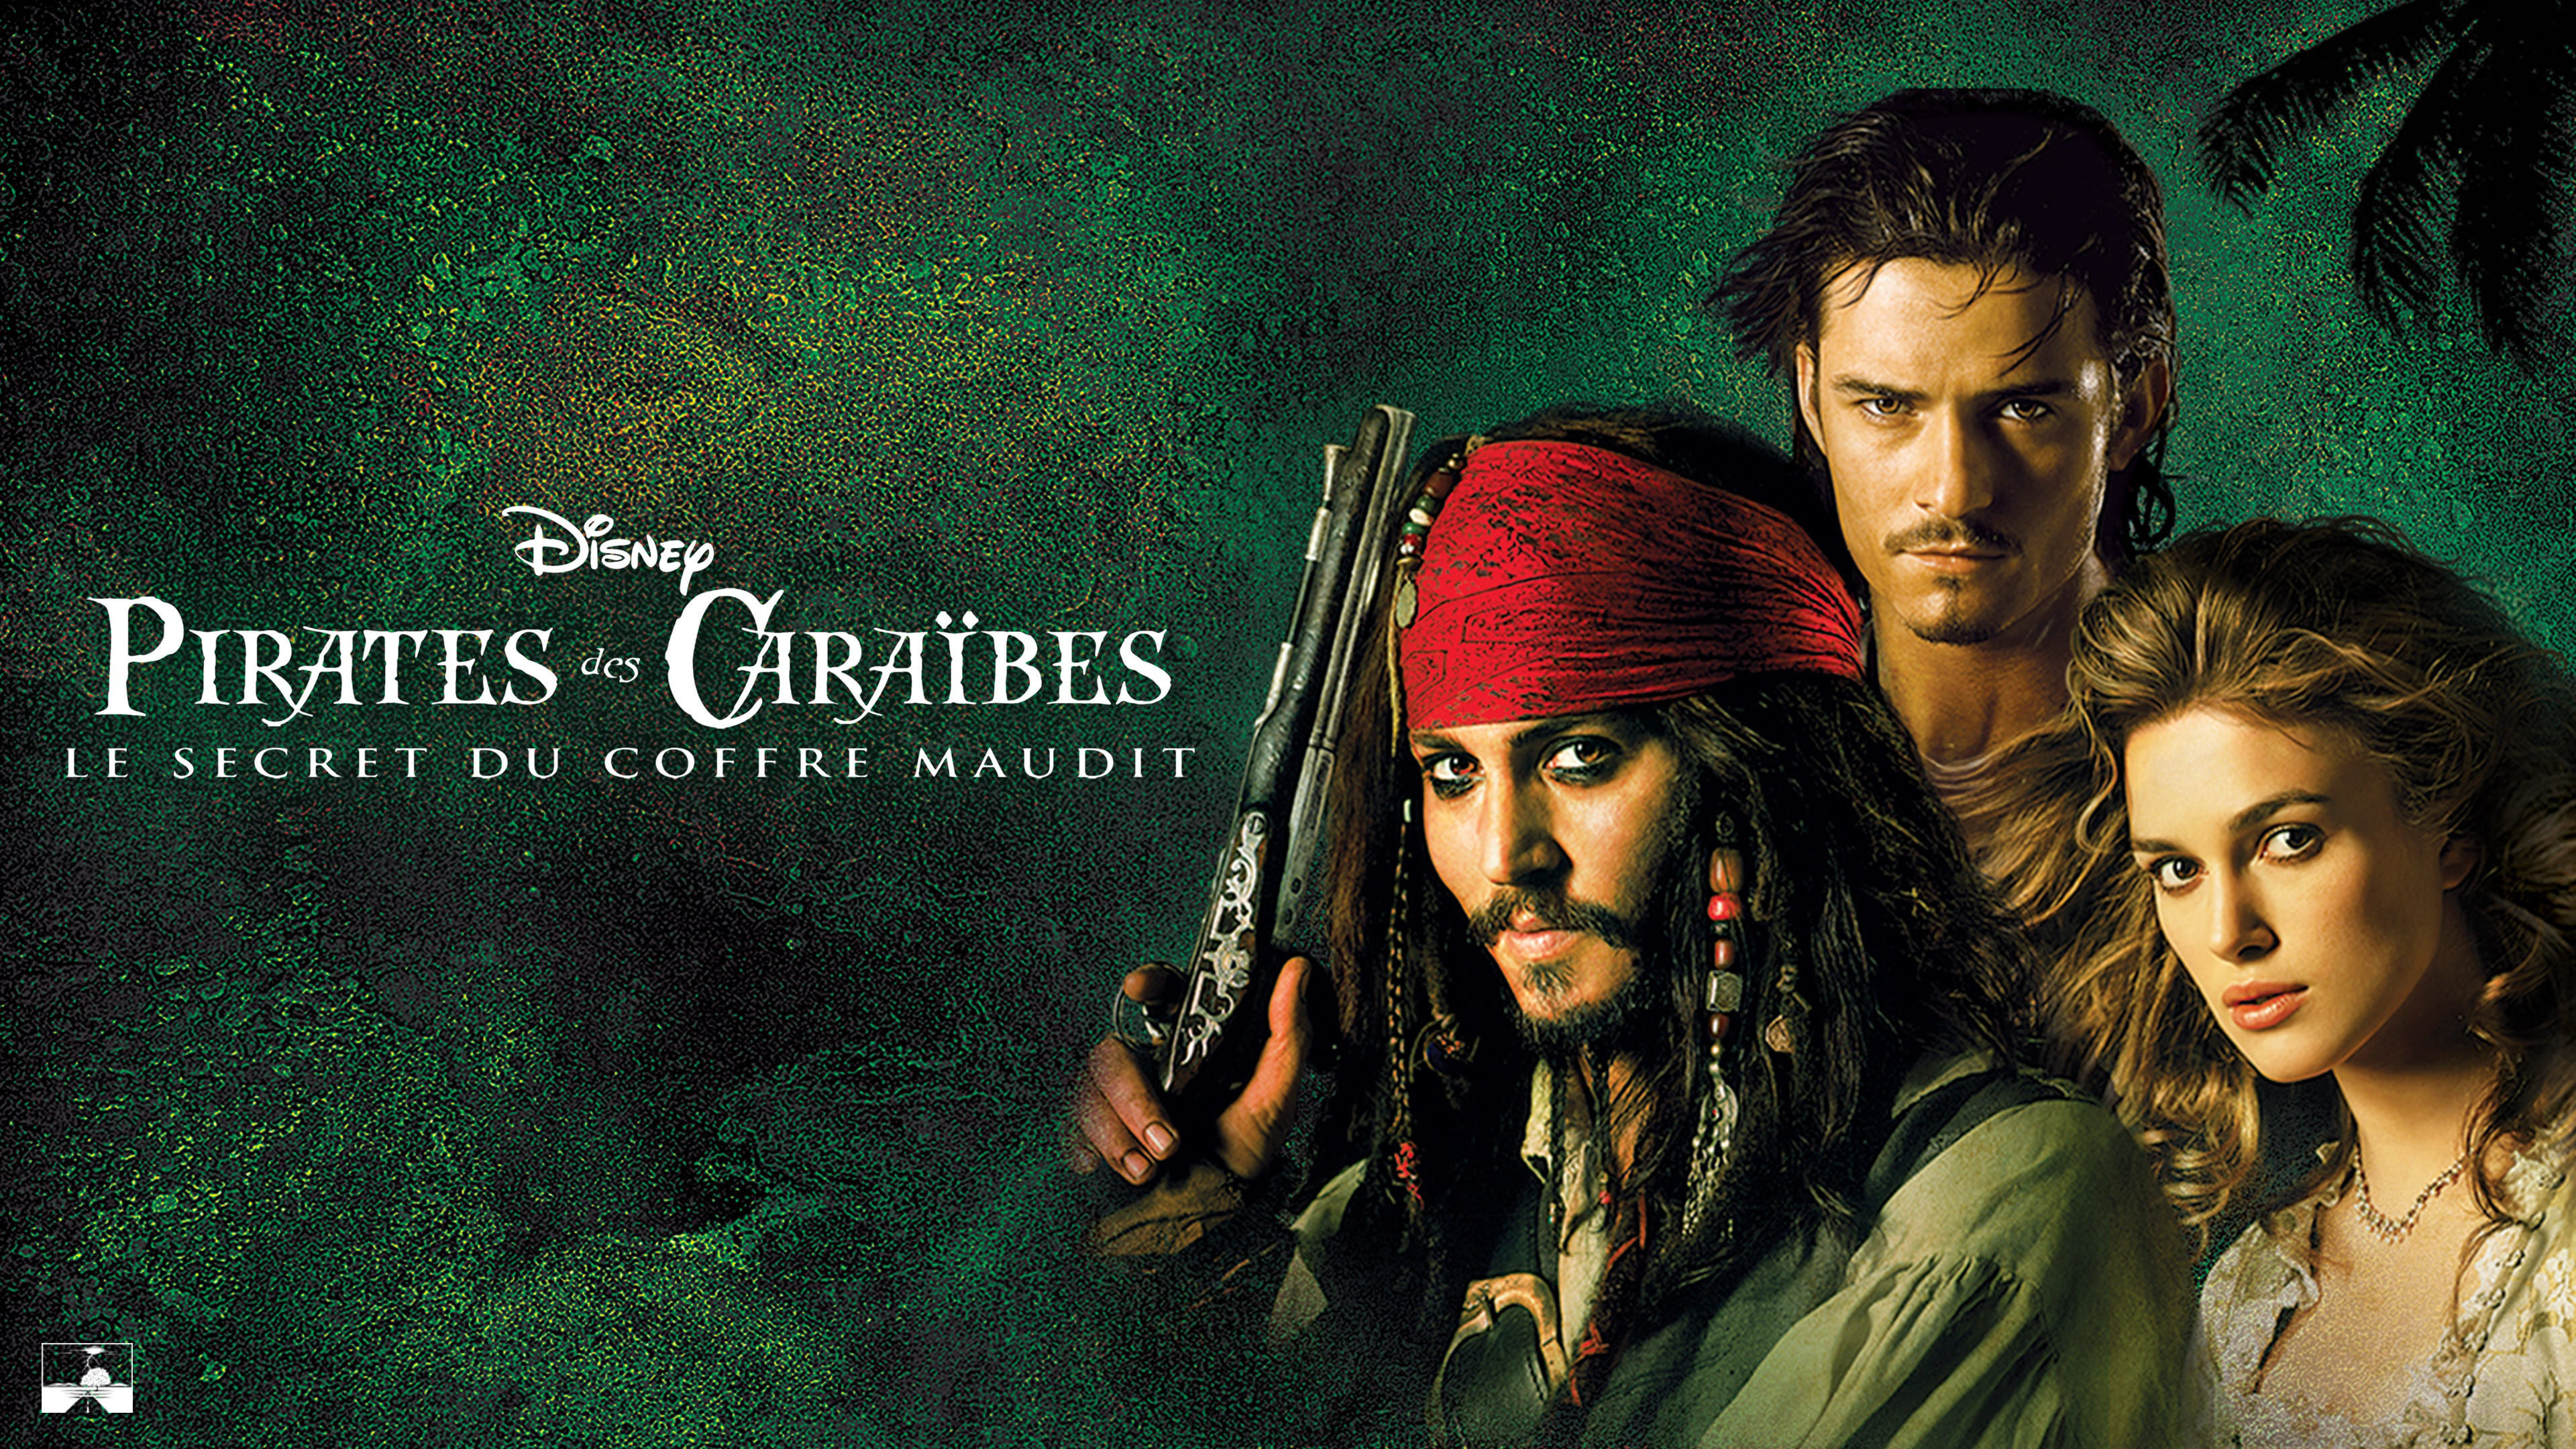 Watch Pirates Of The Caribbean: Dead Man's Chest Full Movie Online, Release Date, Trailer, Cast and Songs